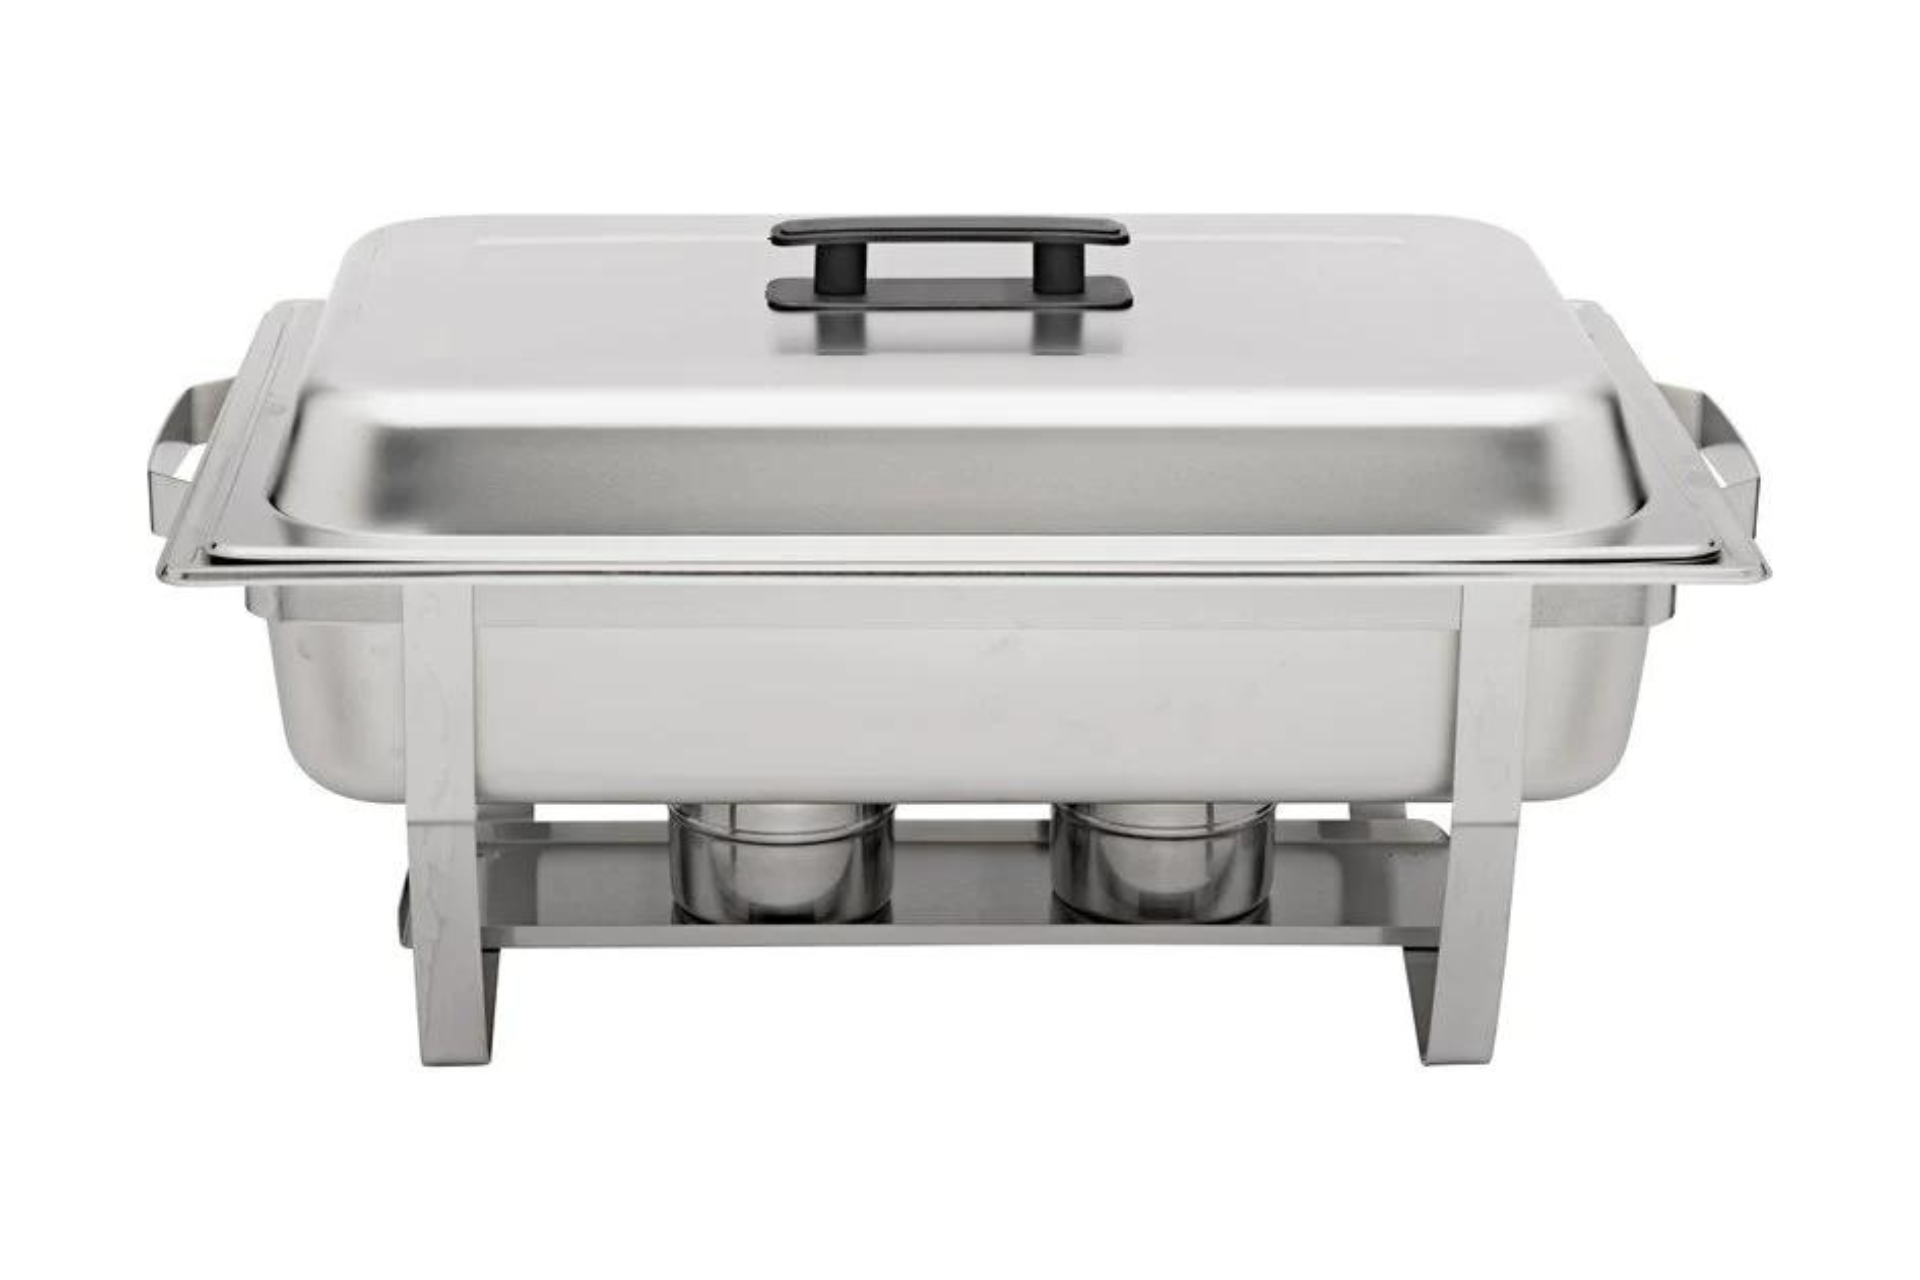 The Browne 575126 Full-Size Economy Chafer